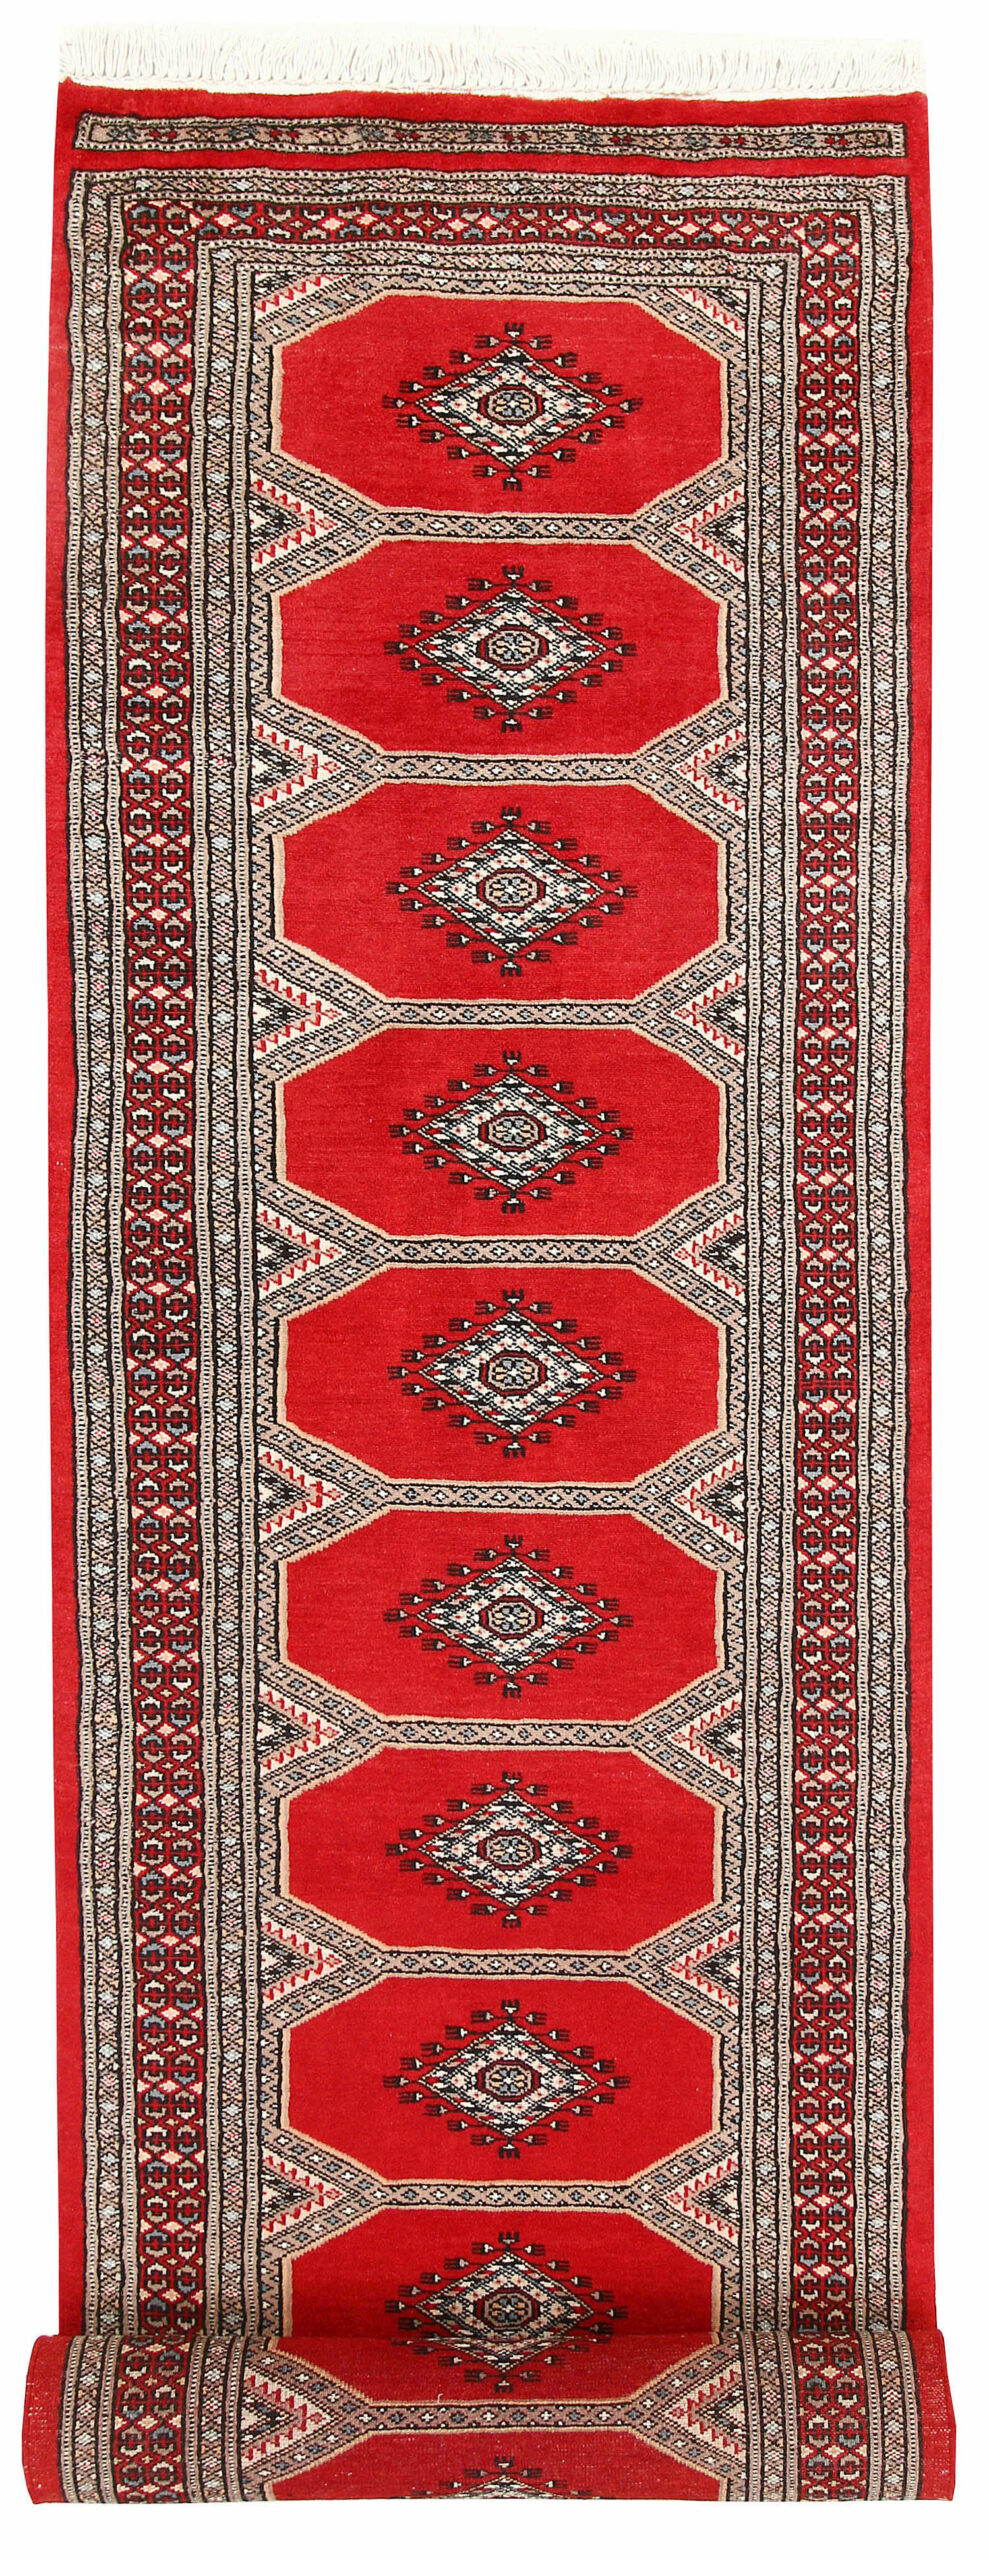 3X5 Rug Size In Cm